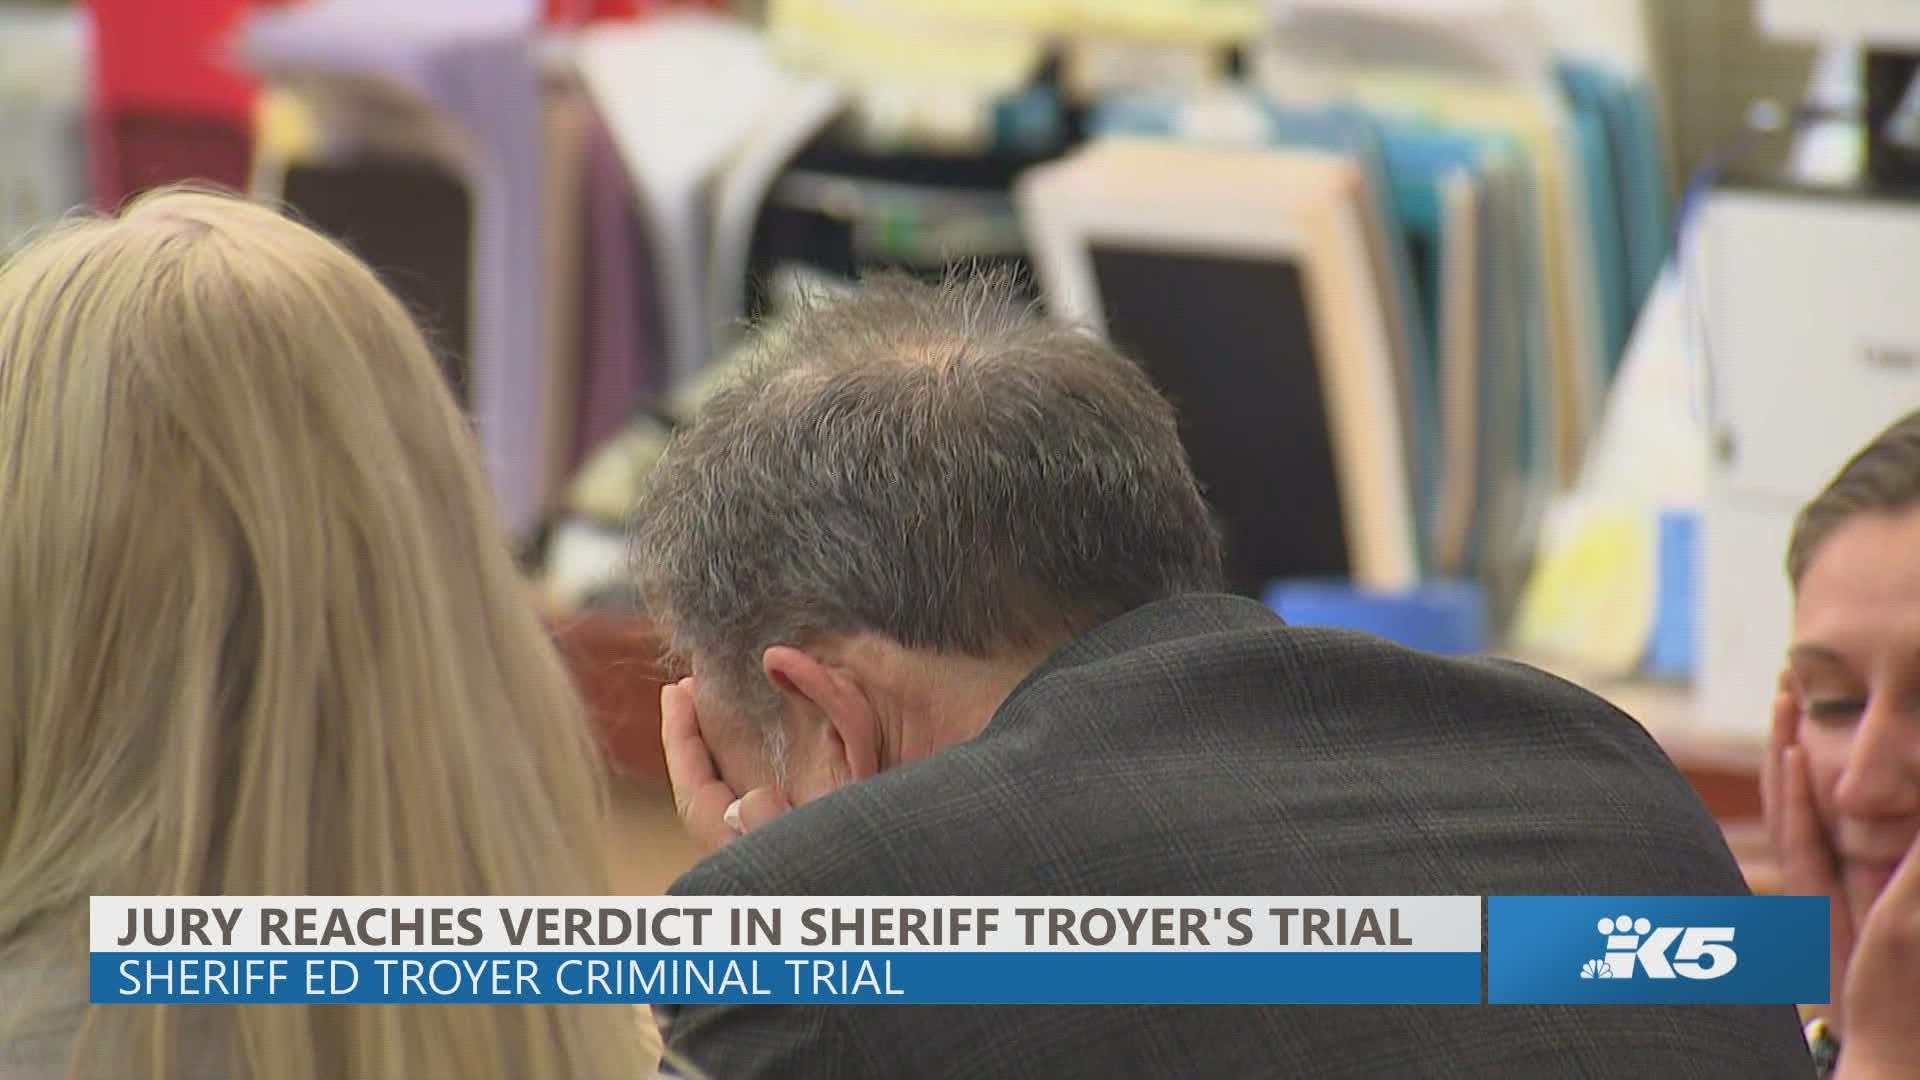 After a 13 day trial, A jury found Pierce County Sheriff Ed Troyer 'not guilty' on both criminal charges.